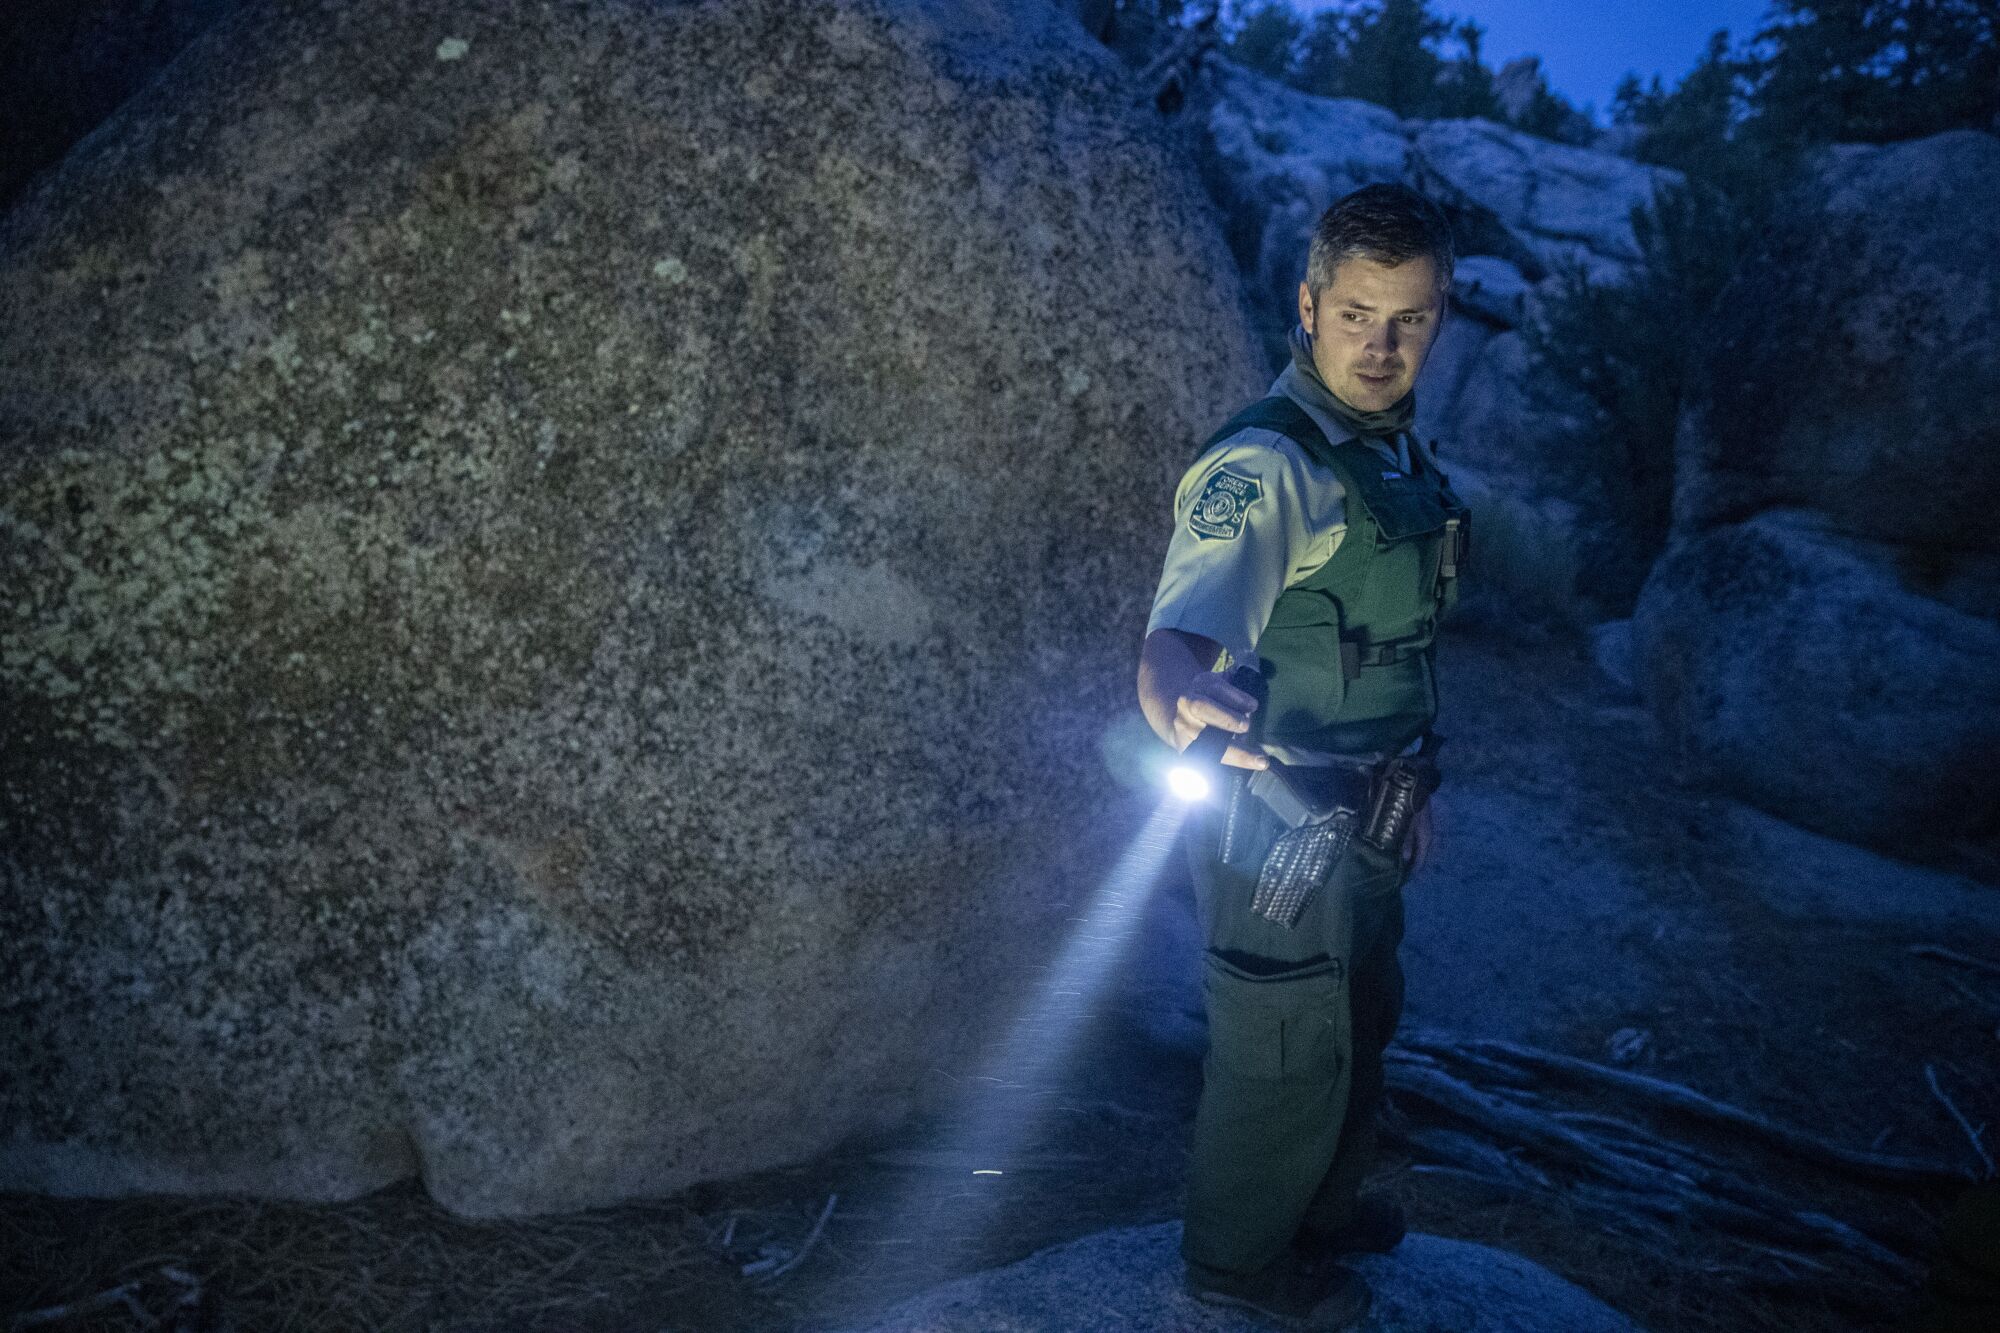  Forest service law enforcement officer Tyler Smith looks for evidence of illegal camping while on patrol 